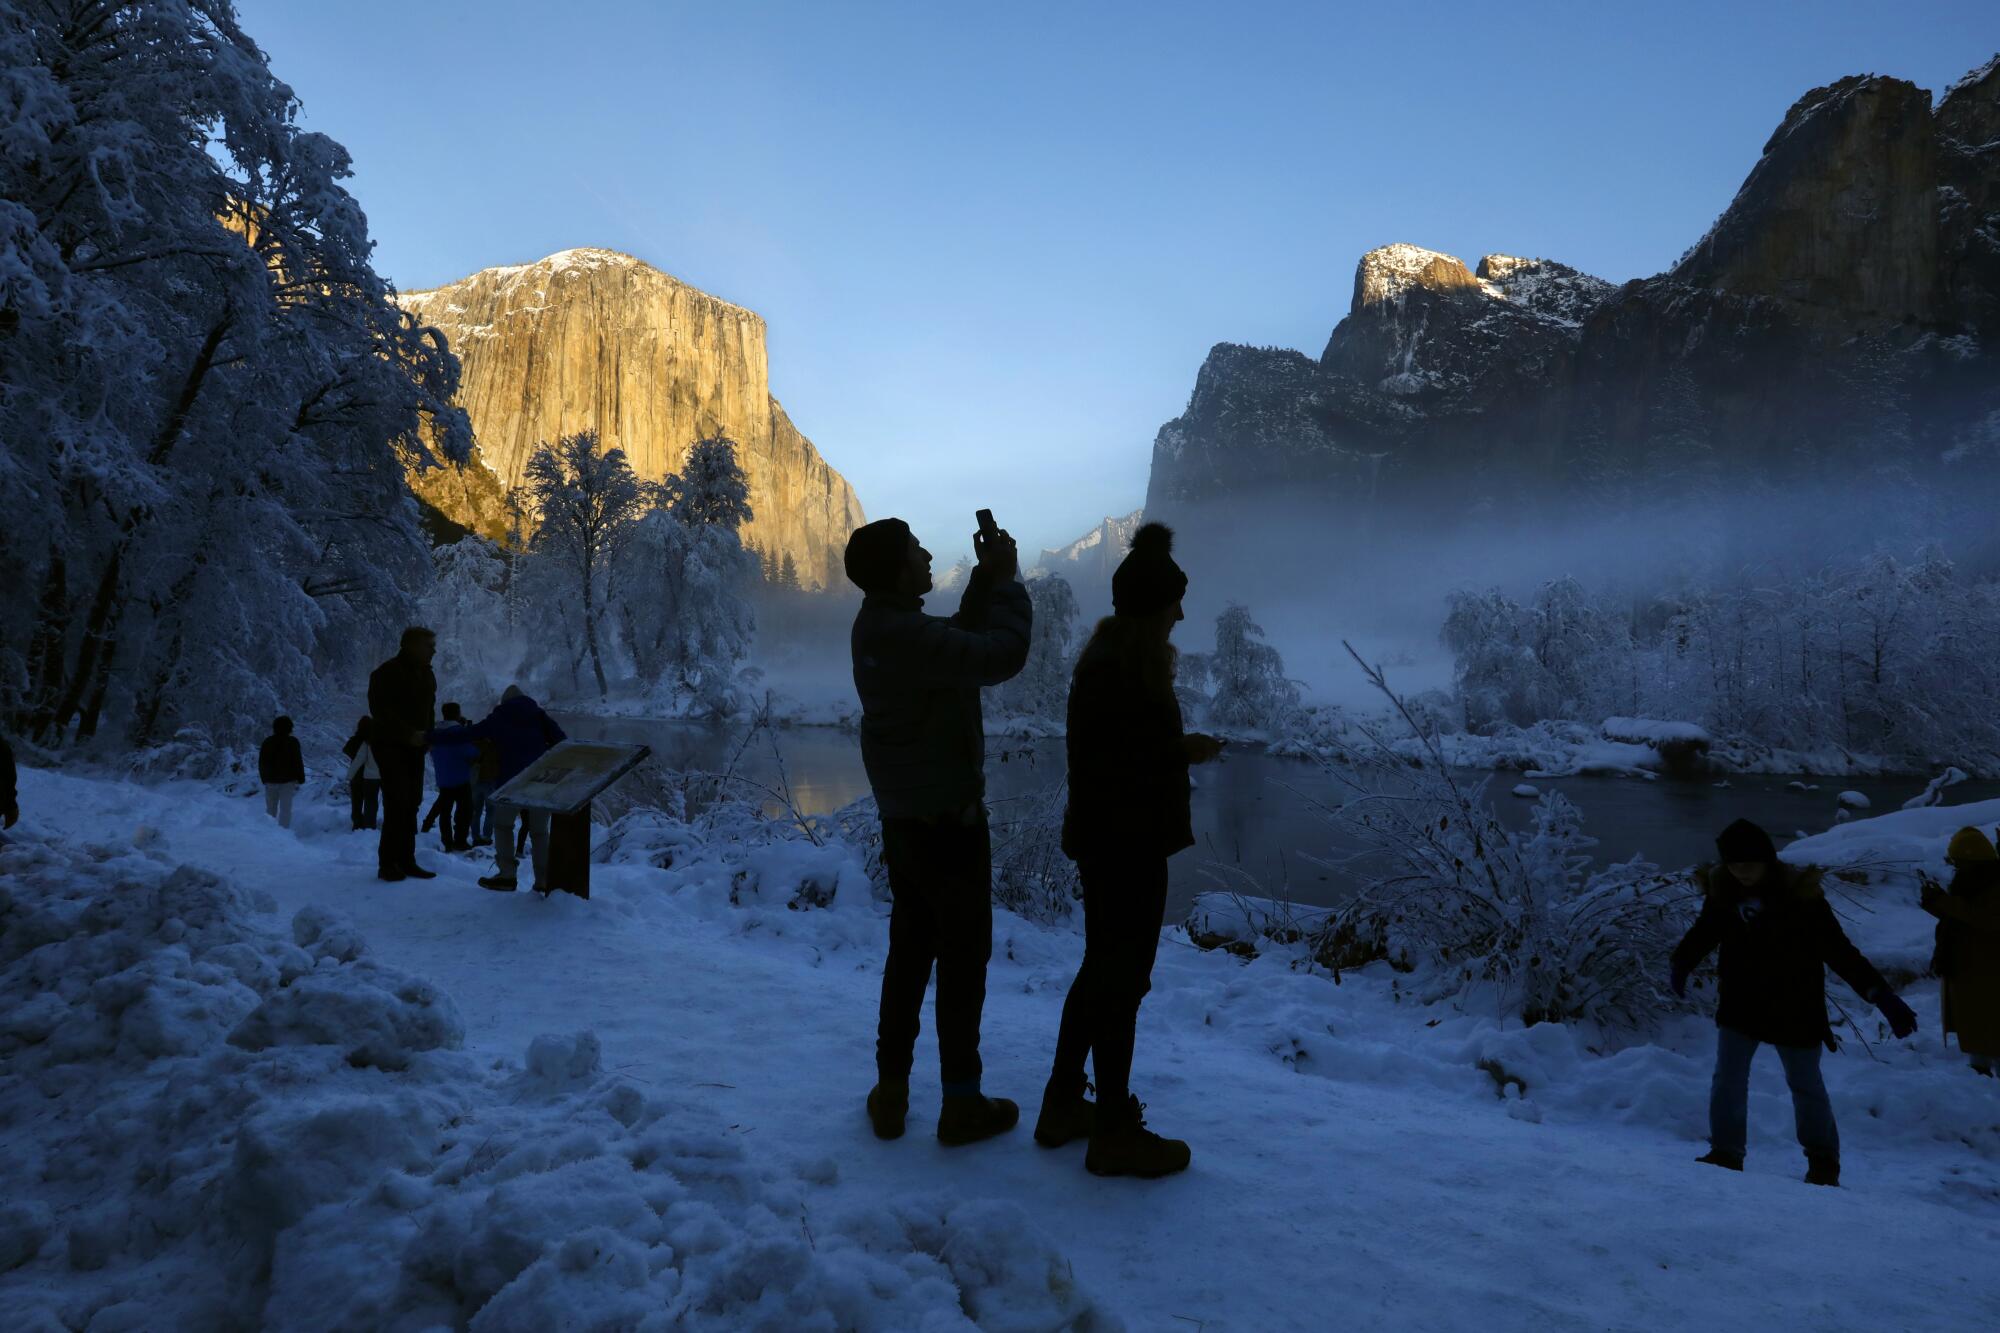 People take pictures of snow in Yosemite National Park.